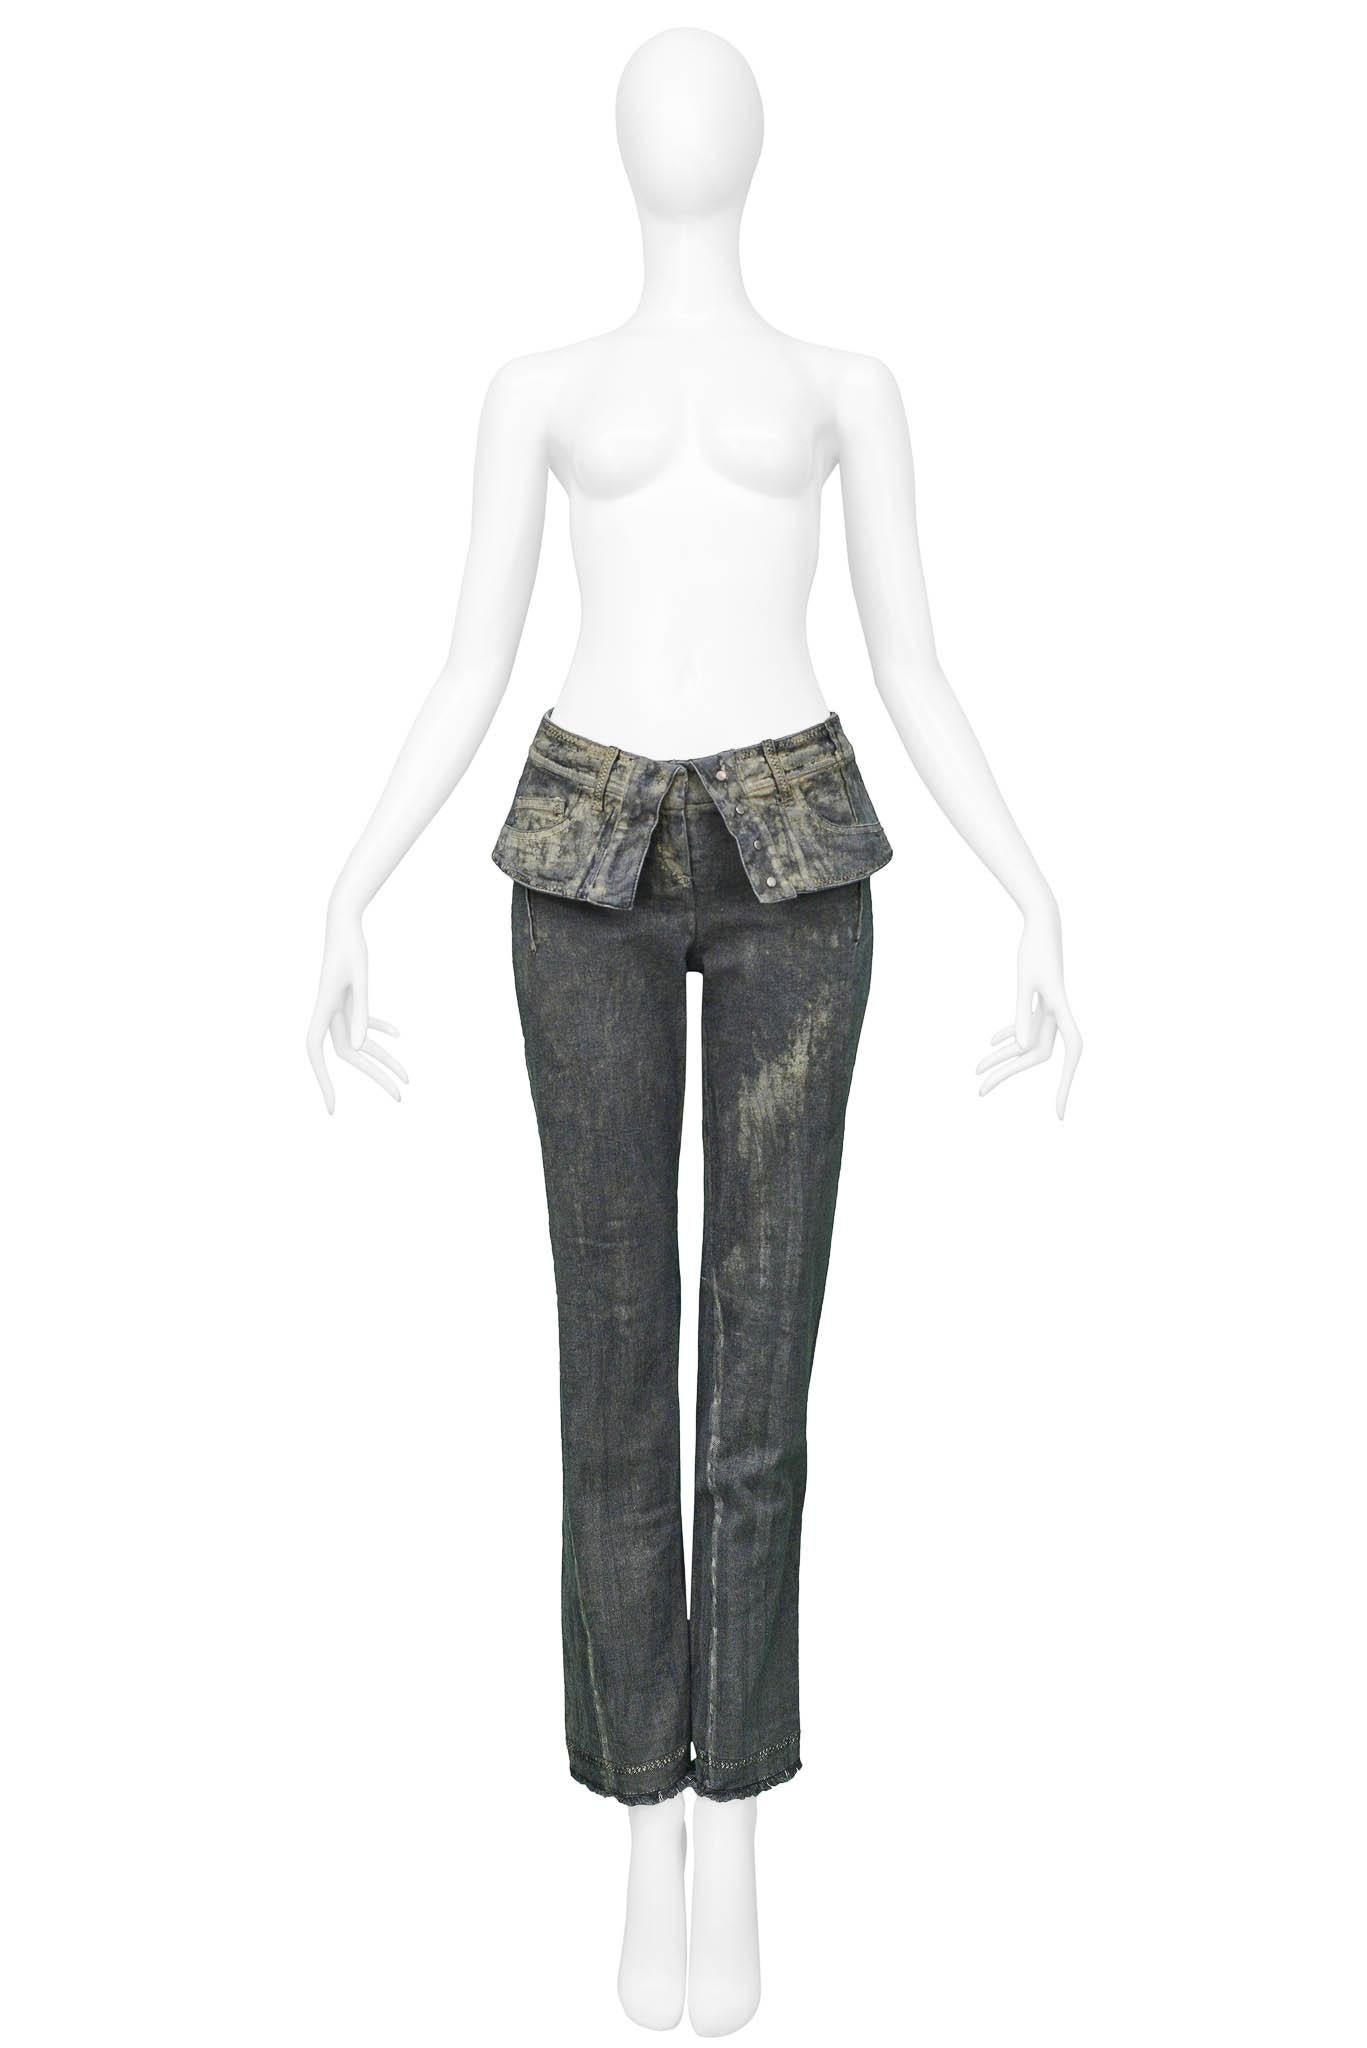 Resurrection Vintage is excited to offer vintage Christian Dior grey jeans featuring a distressed look with gold wax, bac knee darts, and overlapping panels on the waist.

Christian Dior
Size 38
98% Cotton & 2% Lycra 
Excellent Vintage Condition